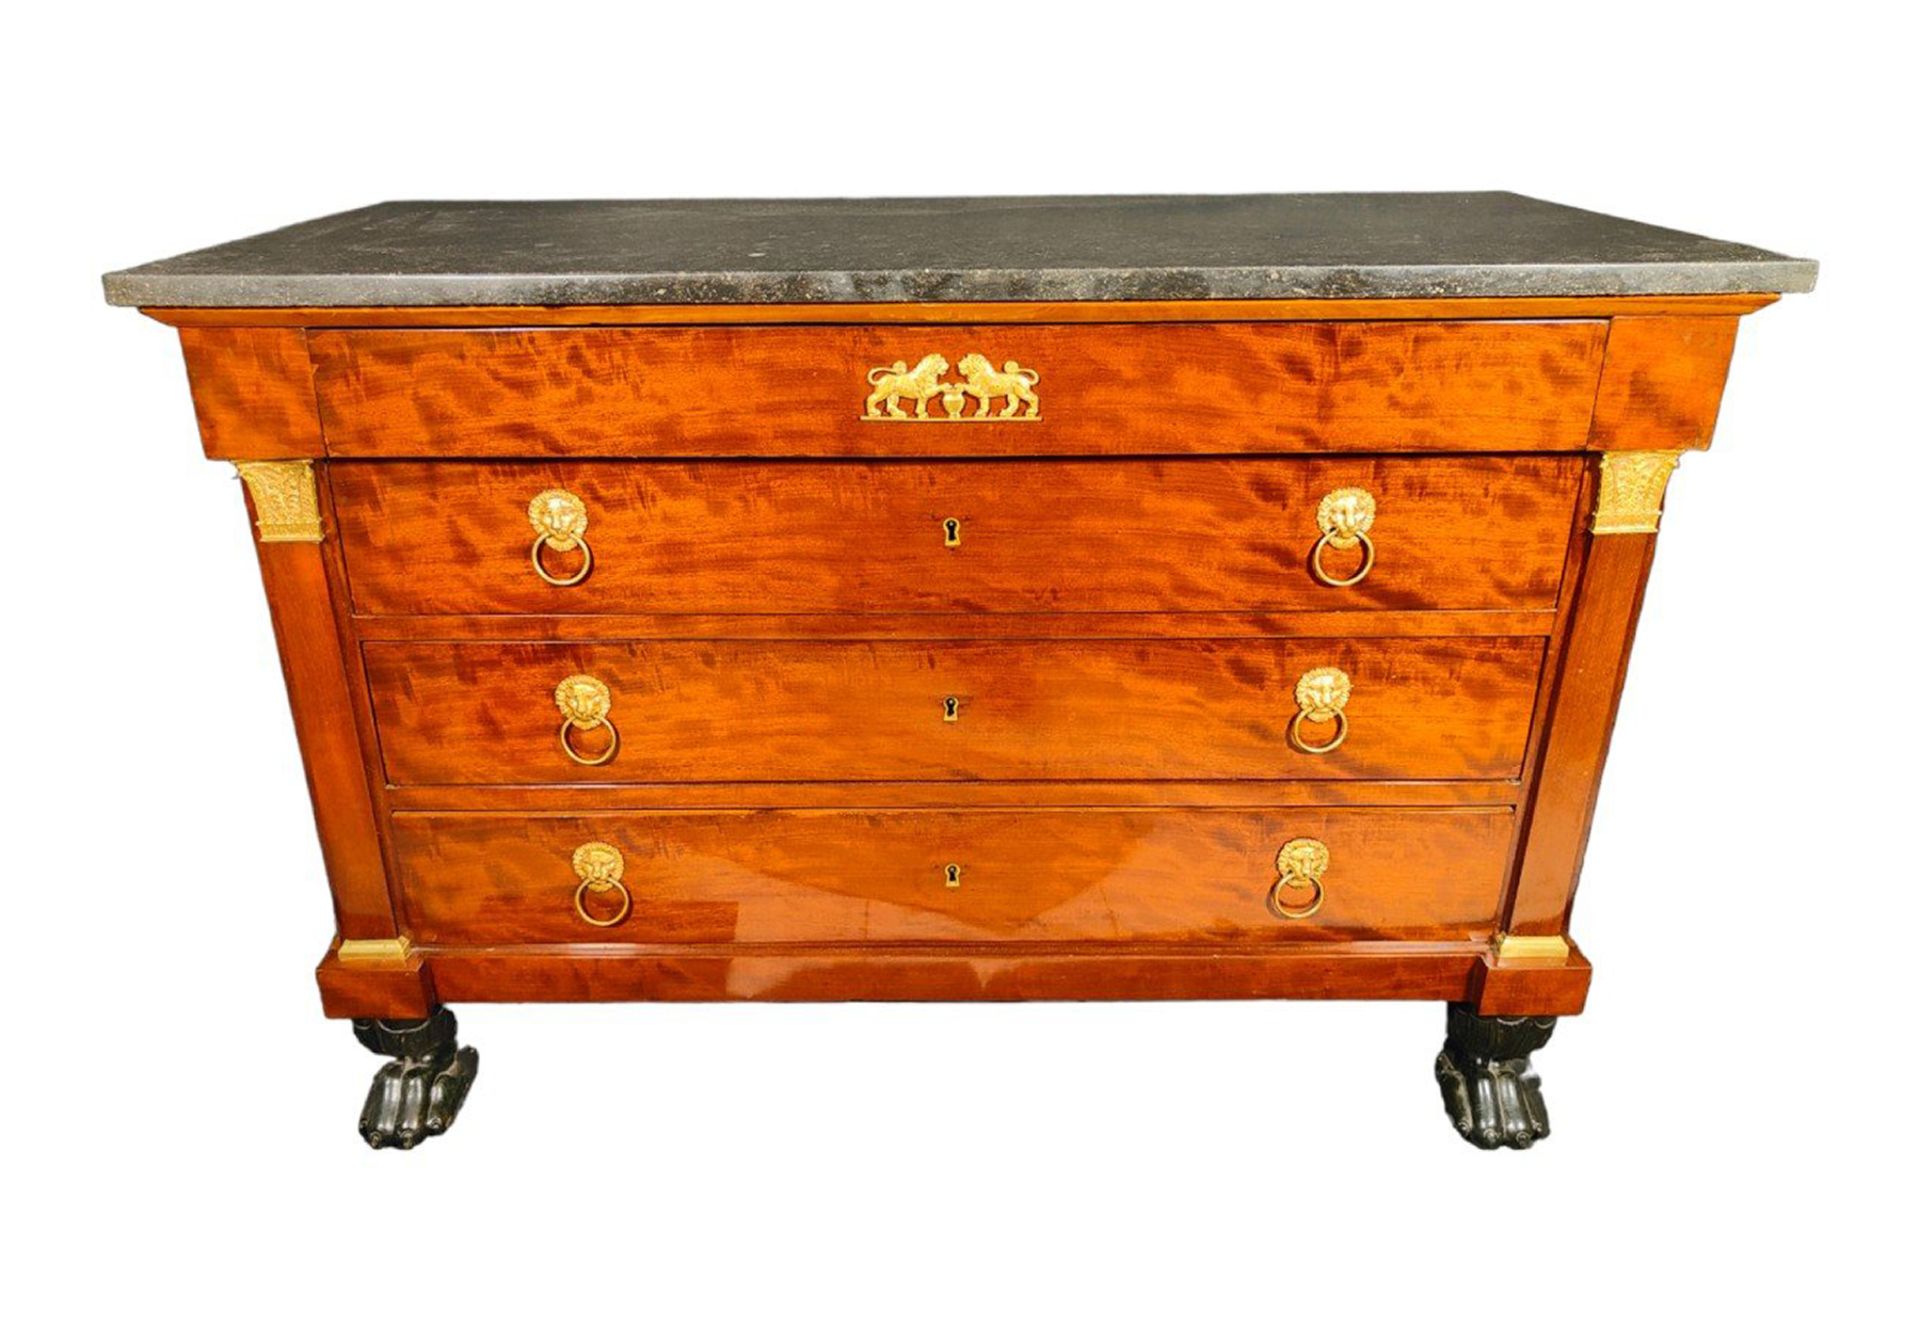 19th century empire chest of drawers, French work - Image 3 of 5